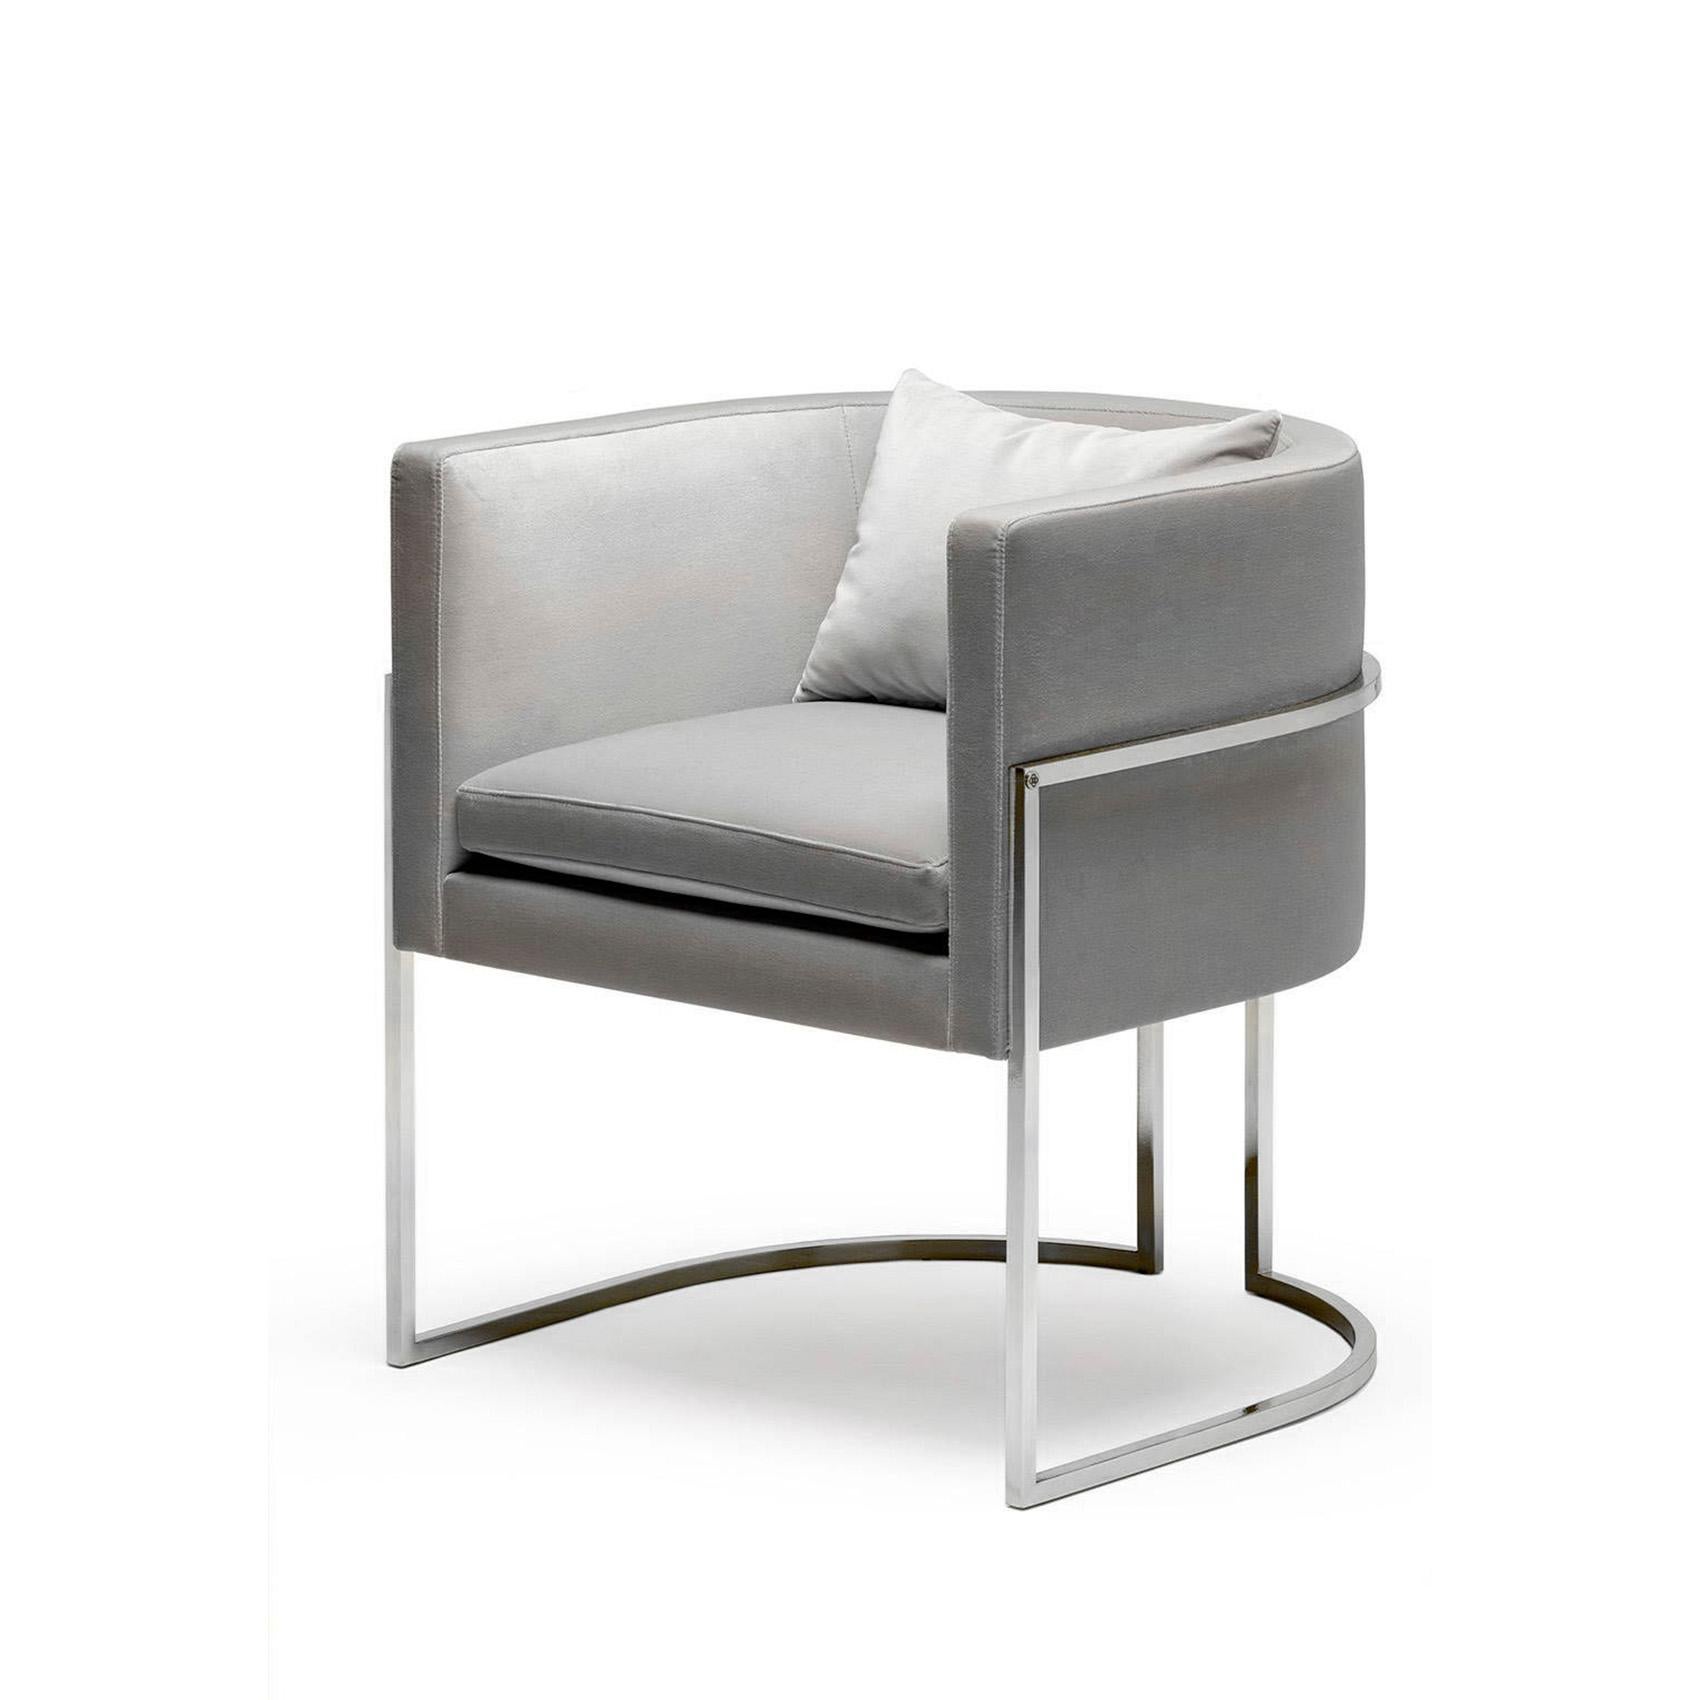 Stainless Steel Julius Chair by Duistt
Dimensions: W 62 x D 62 x H 71 cm
Materials: Duistt Fabric and Stainless Steel

The JULIUS stainless steel chair, crafted with great attention to detail, gives us clean and modern lines always with a strong